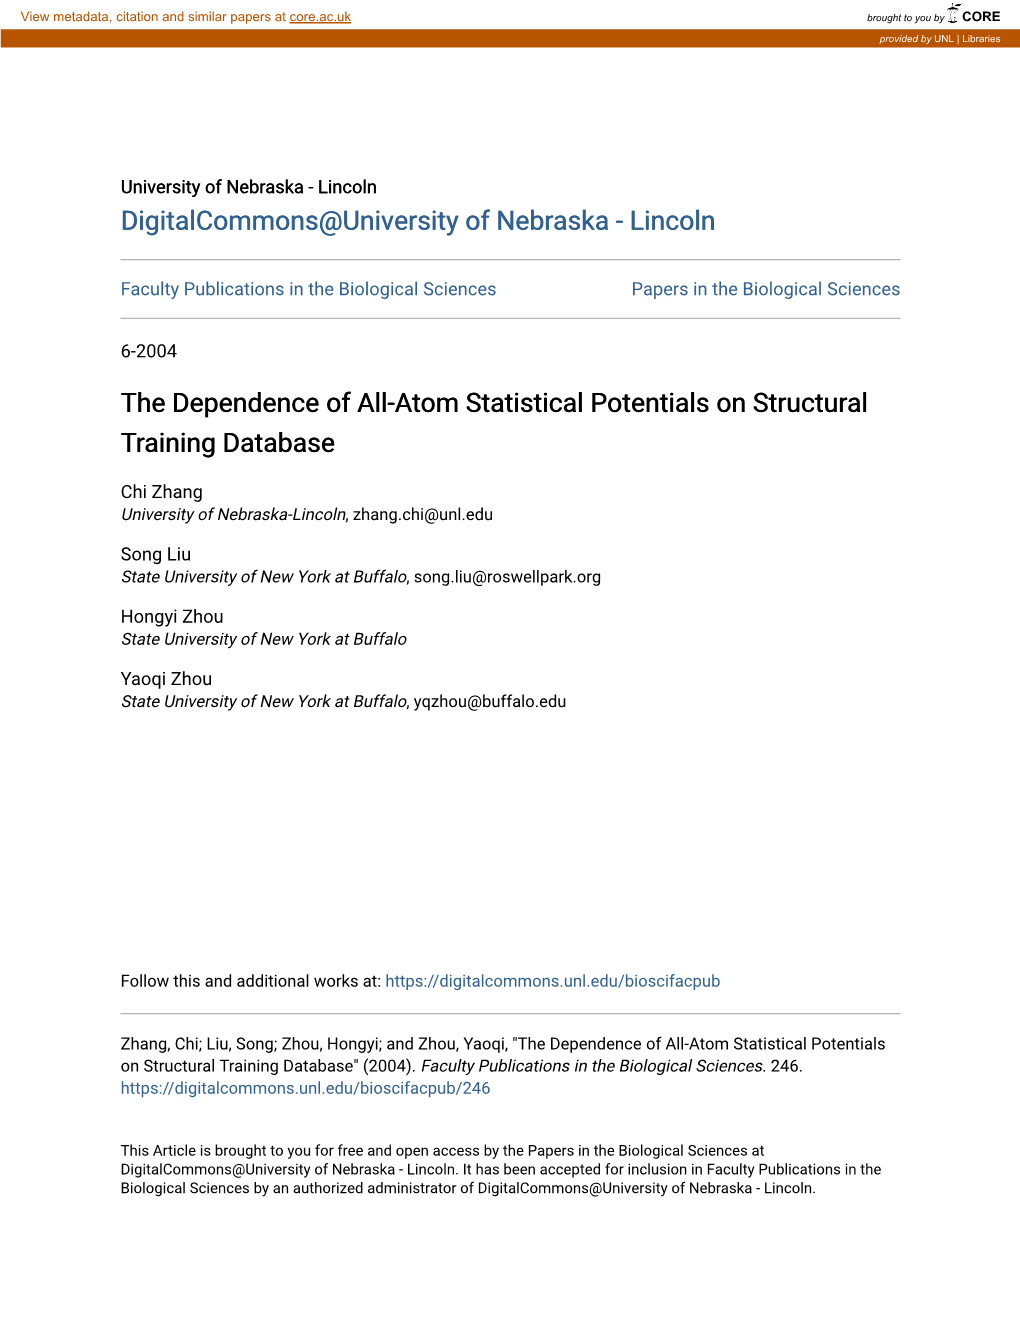 The Dependence of All-Atom Statistical Potentials on Structural Training Database